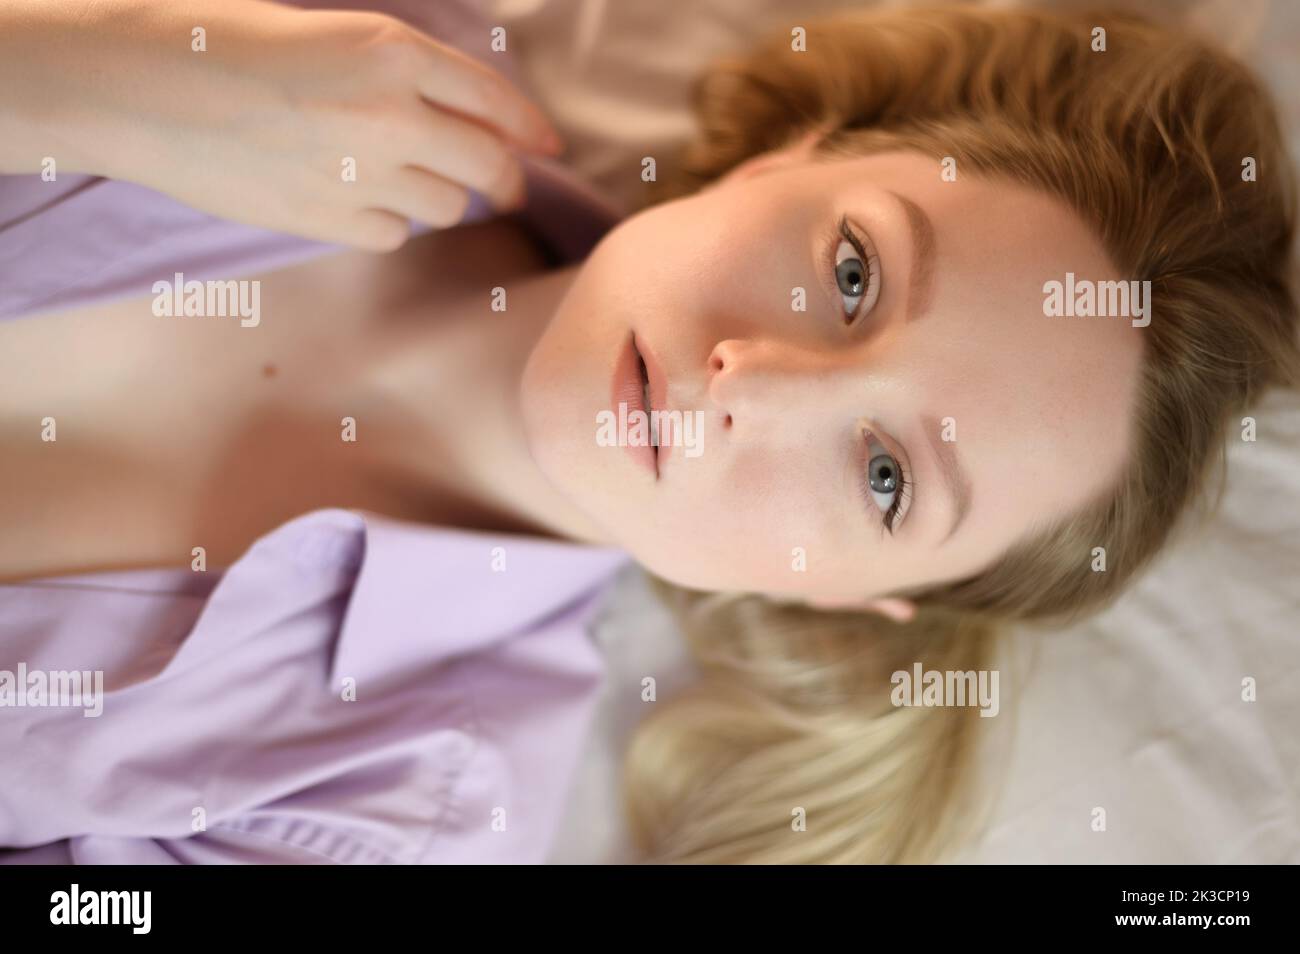 Portrait of a young woman with blue eyes. Top view. Stock Photo